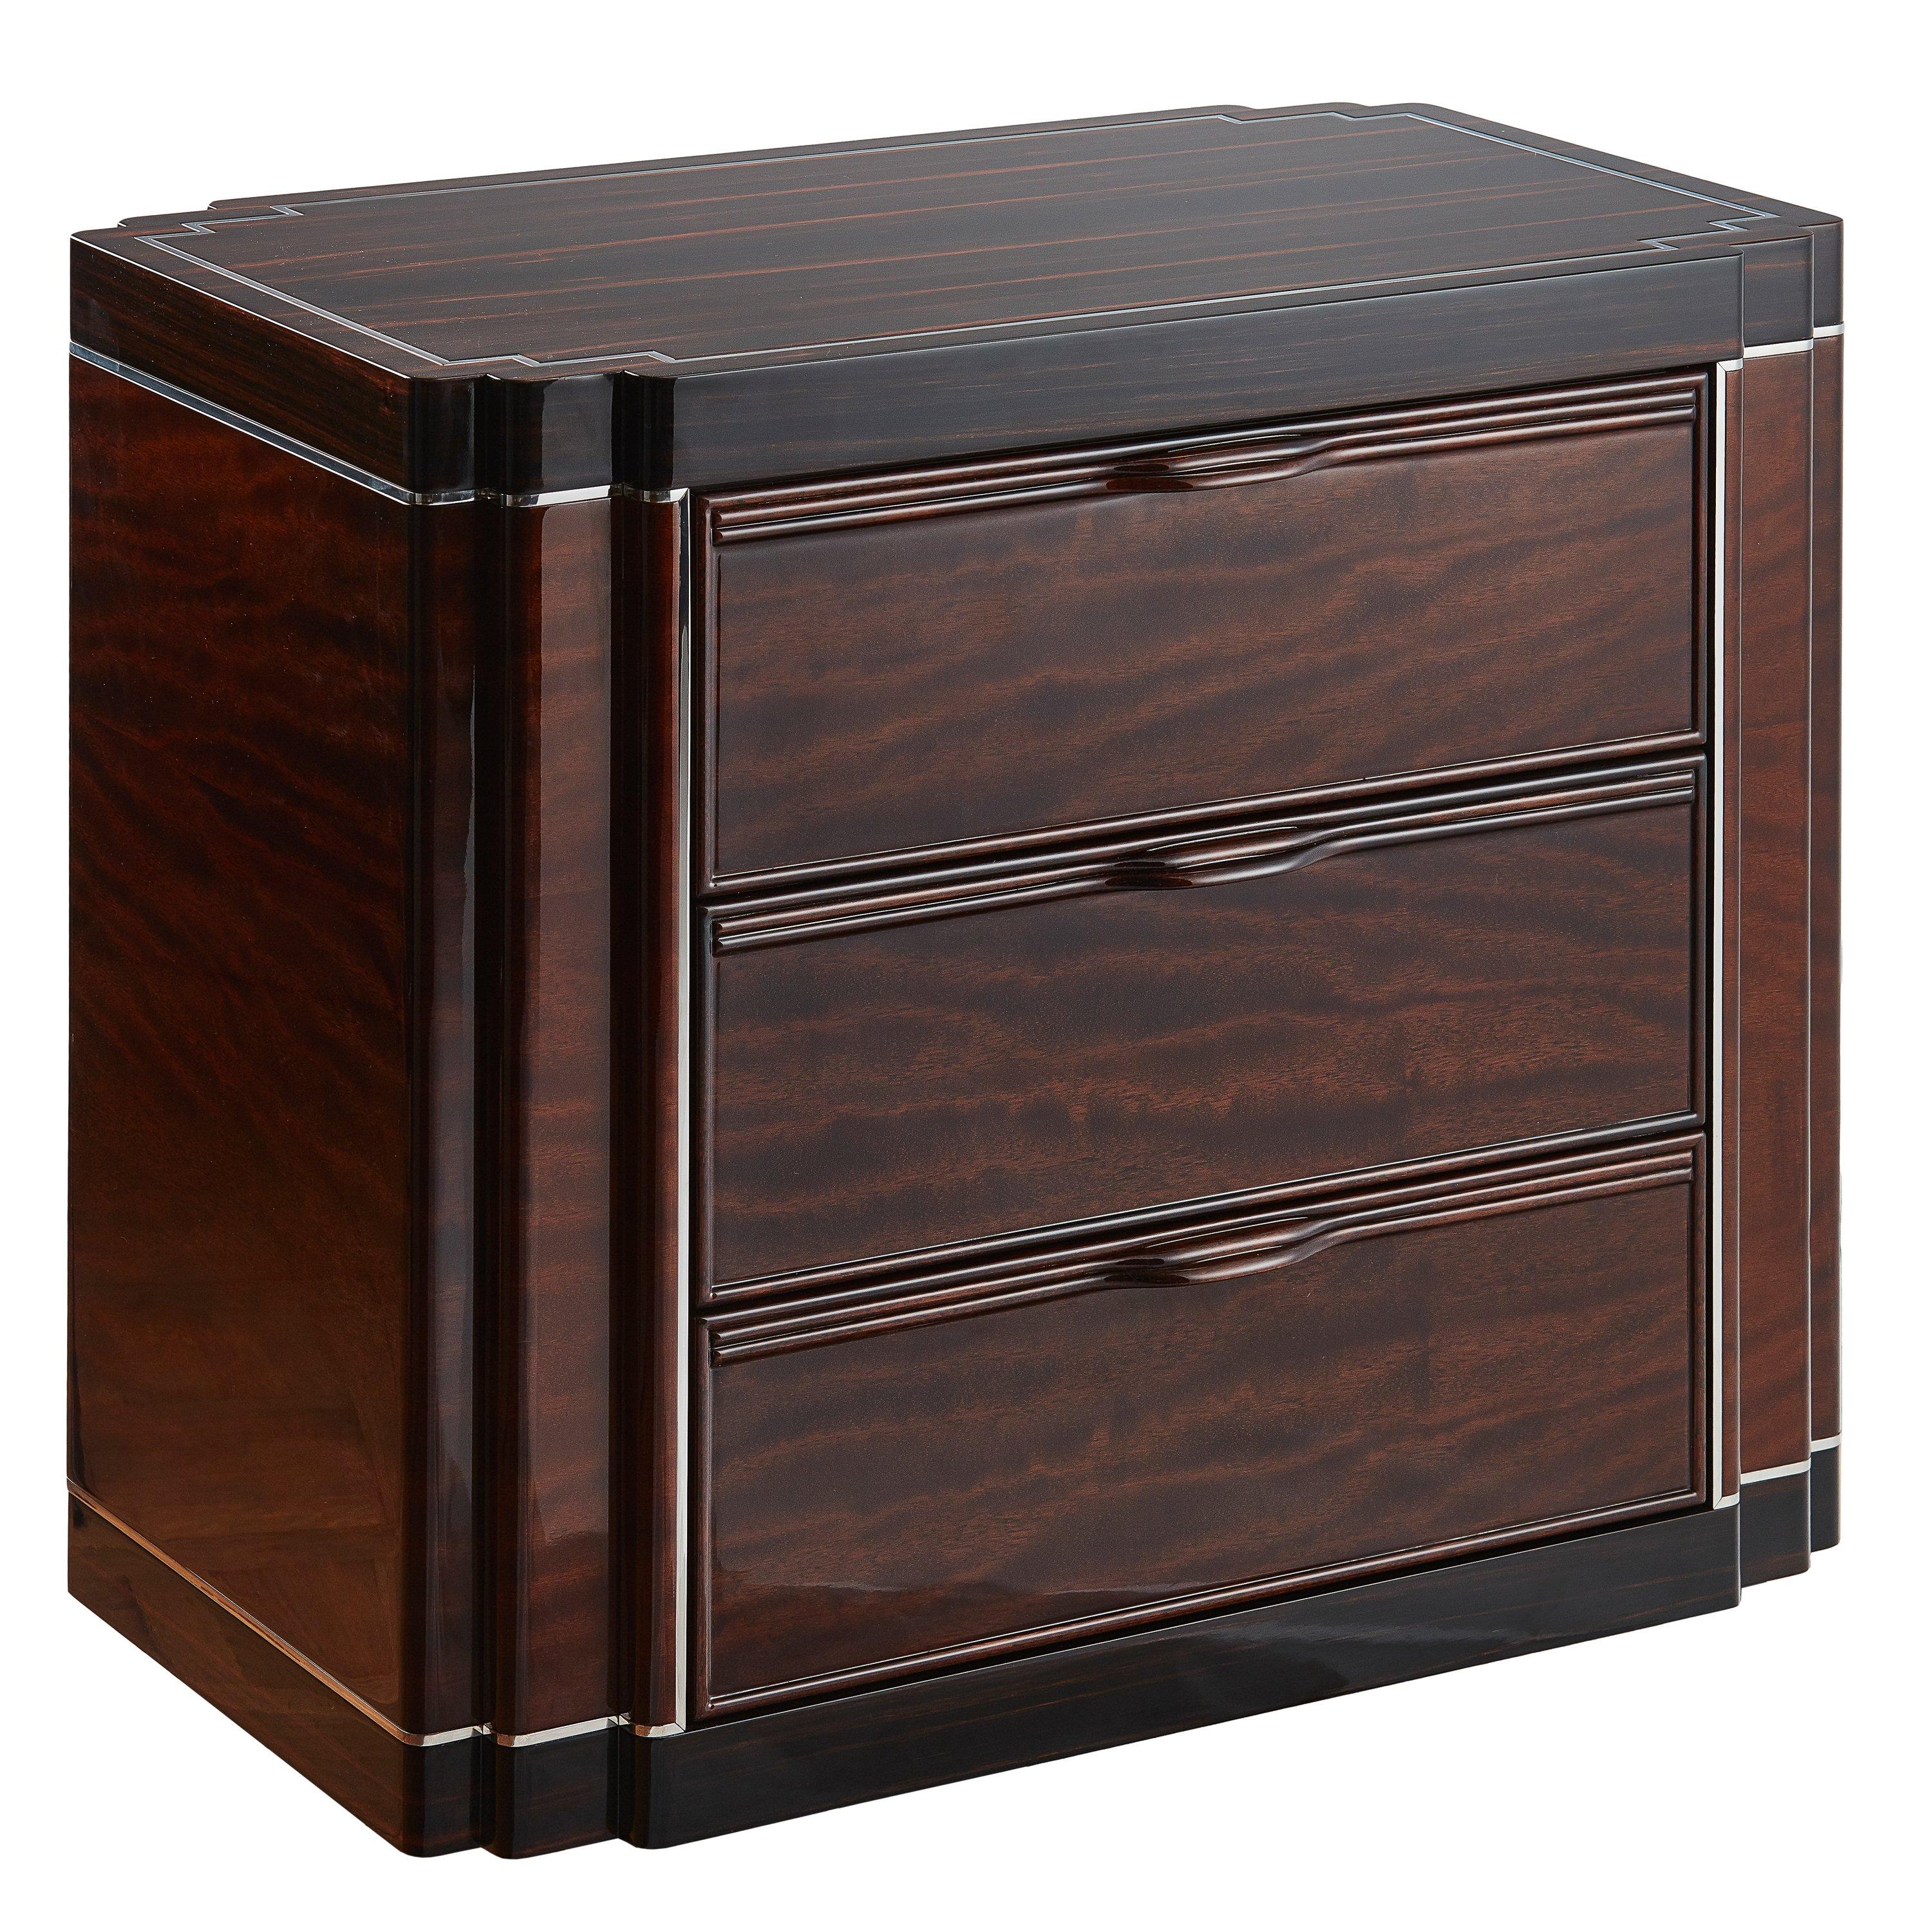 Classic American Art Deco cabinet finished two-tone acajou and Macassar exotic wood veneer. All finished with high-gloss lacquer. The intricate decoration is made of polished stainless steel inserts. The hand carved custom handles integrated into